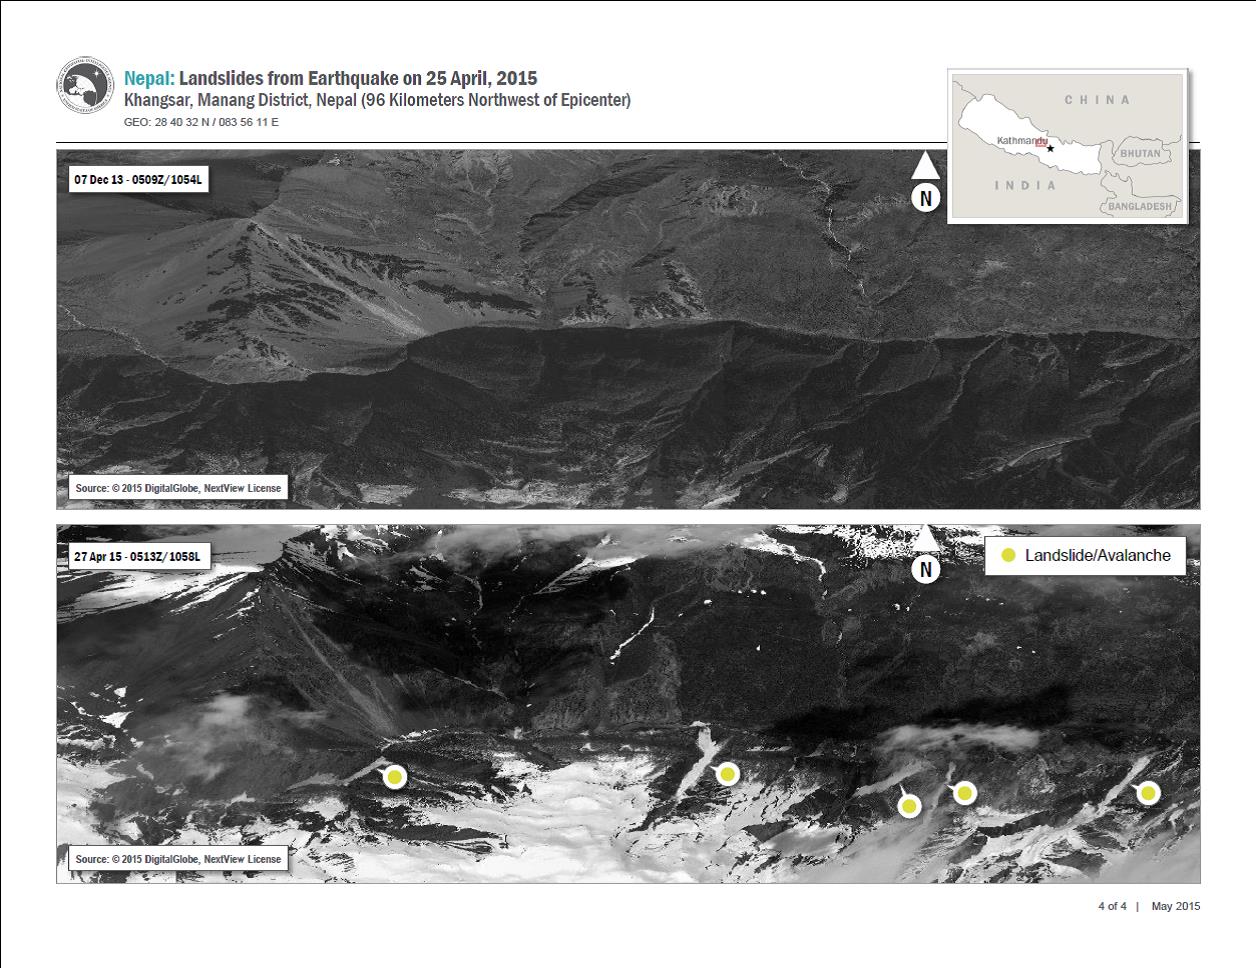 Landslide indicator map showing the locations of landslides as a result of the April 25, 2015, earthquake in Nepal. The imagery was provided through USGS to the users of the International Charter Space and Major Disasters.